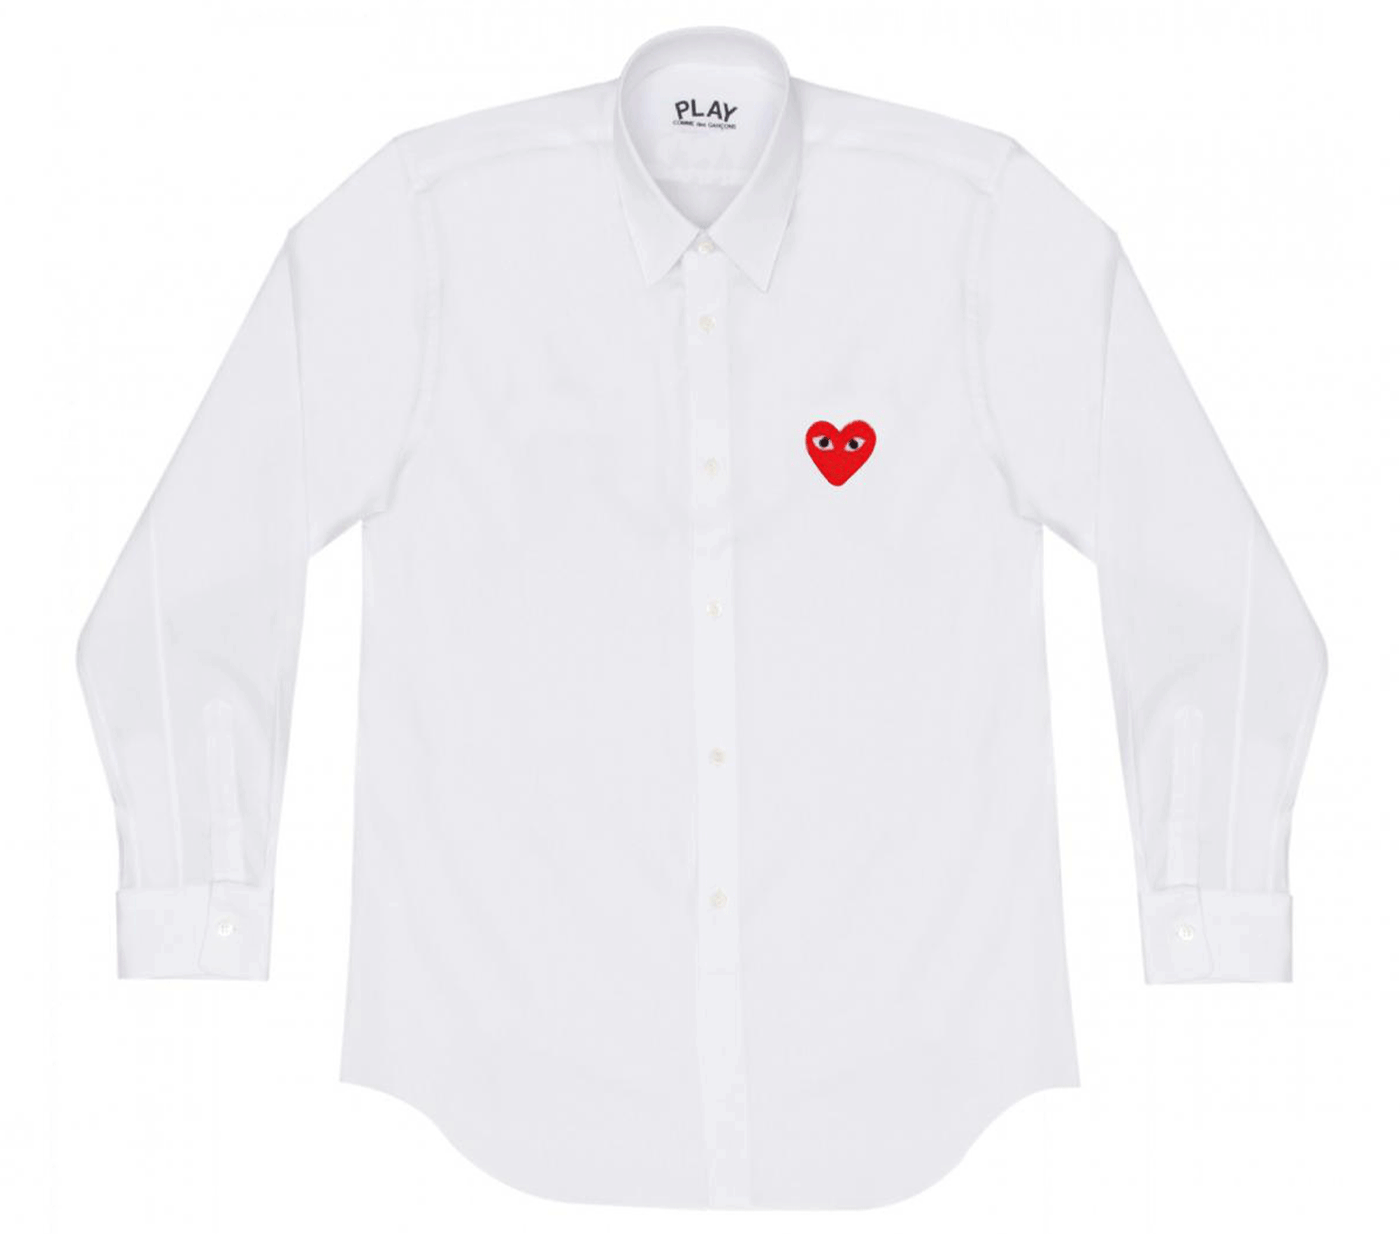 Comme-des-Garcons-Play-Red-Heart-Long-Sleeve-Shirt-Women-White-1